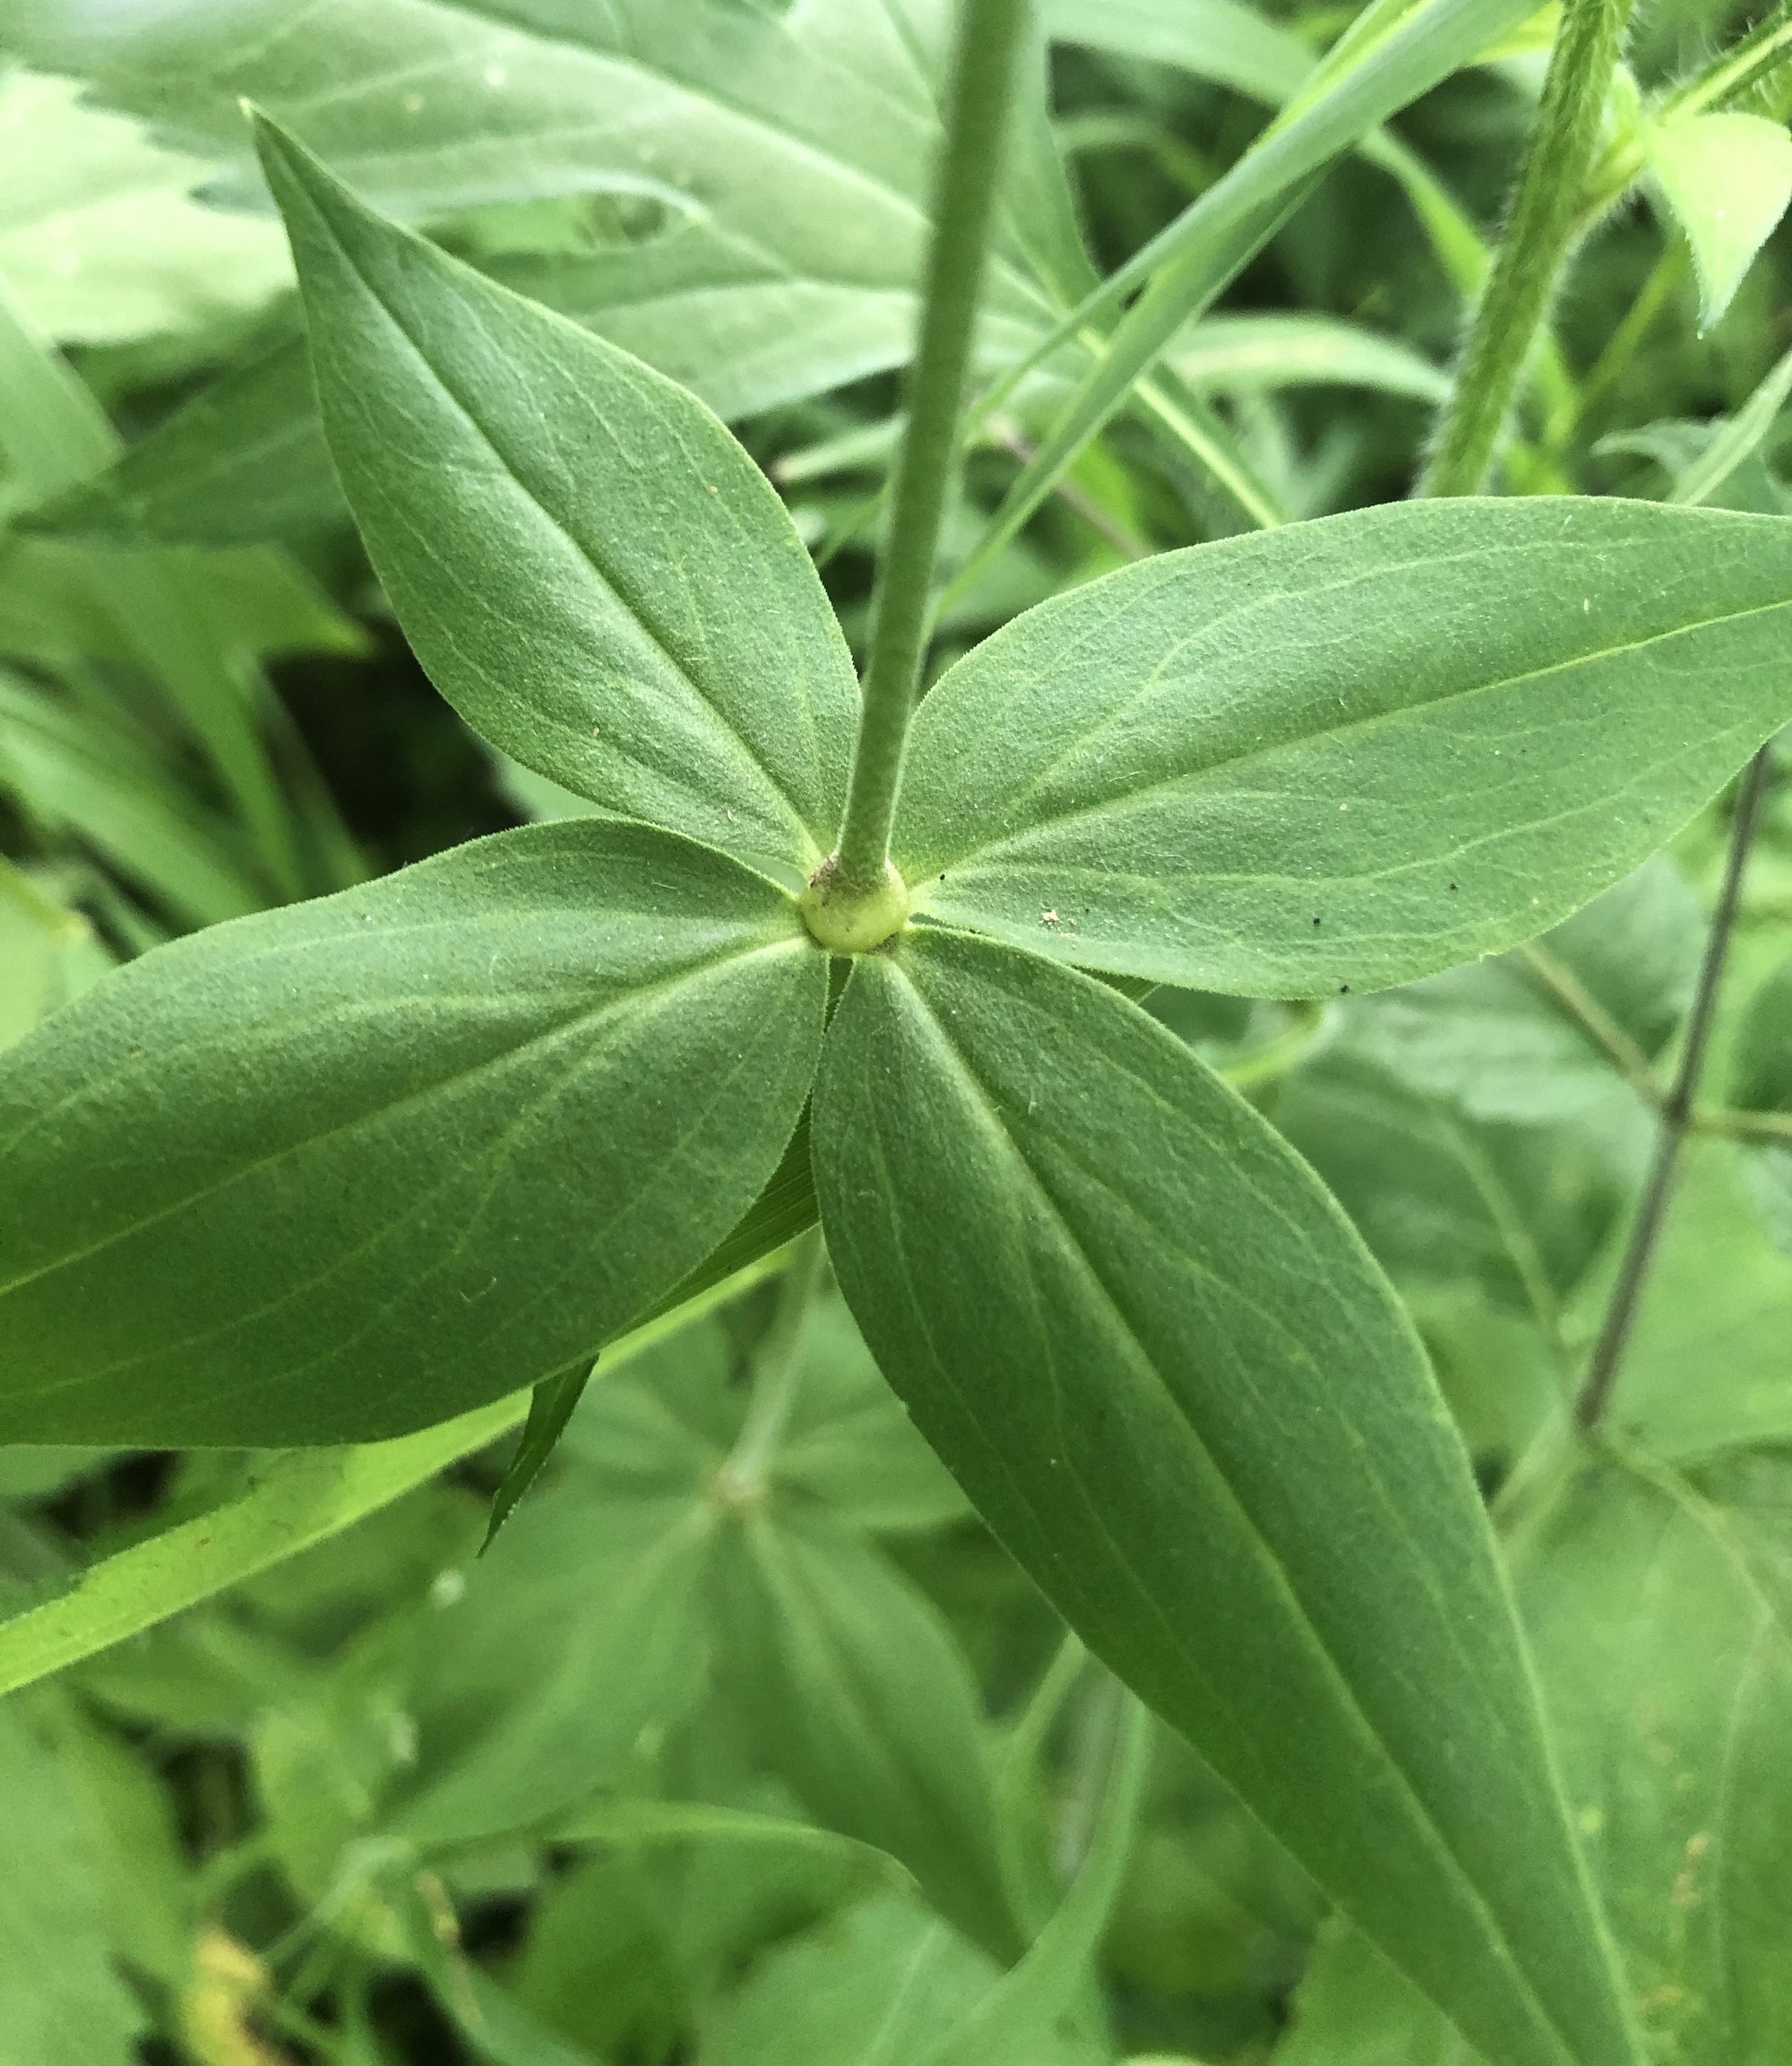 Starry Campion whorled leaves in Nakoma Park on July 14, 2020.